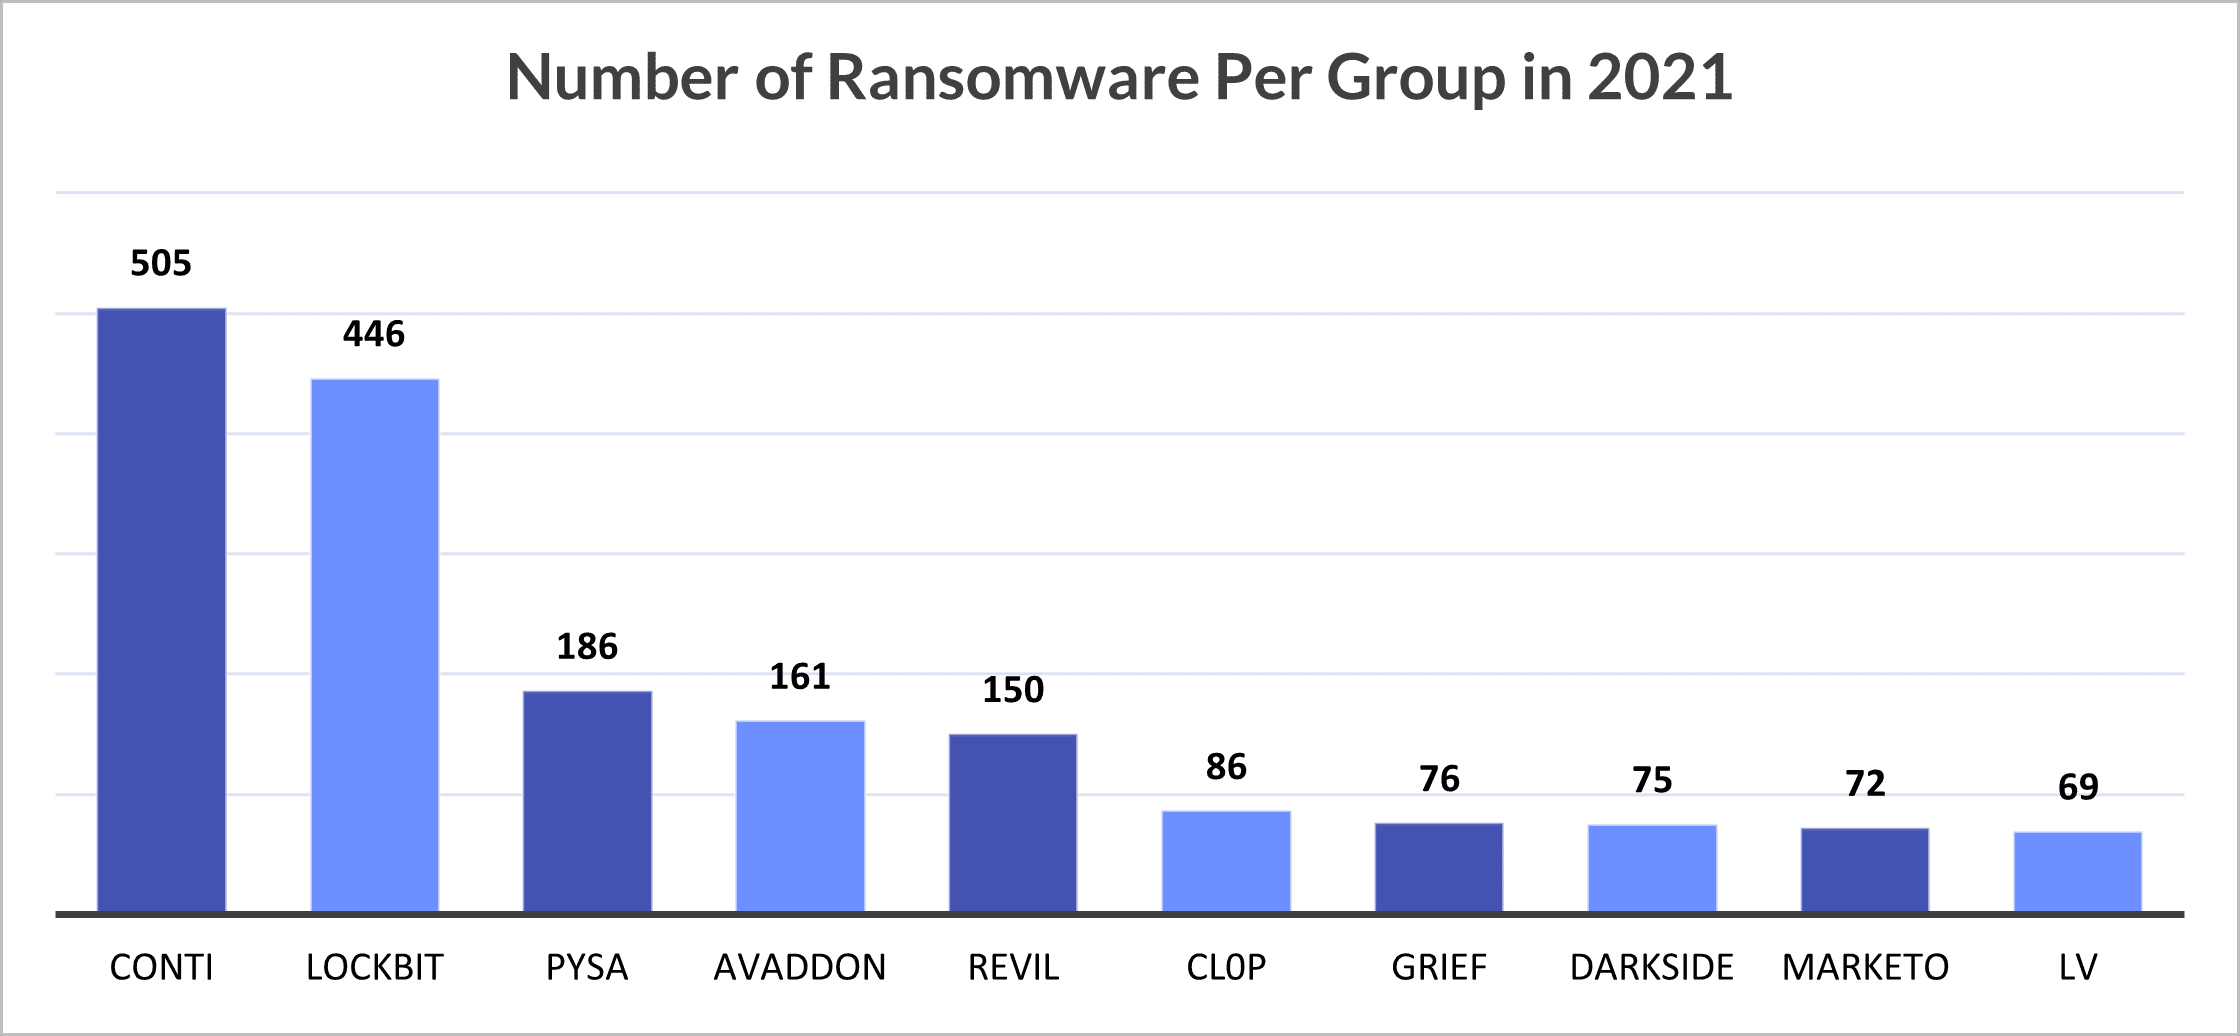 Ransomware cases per family for 2021